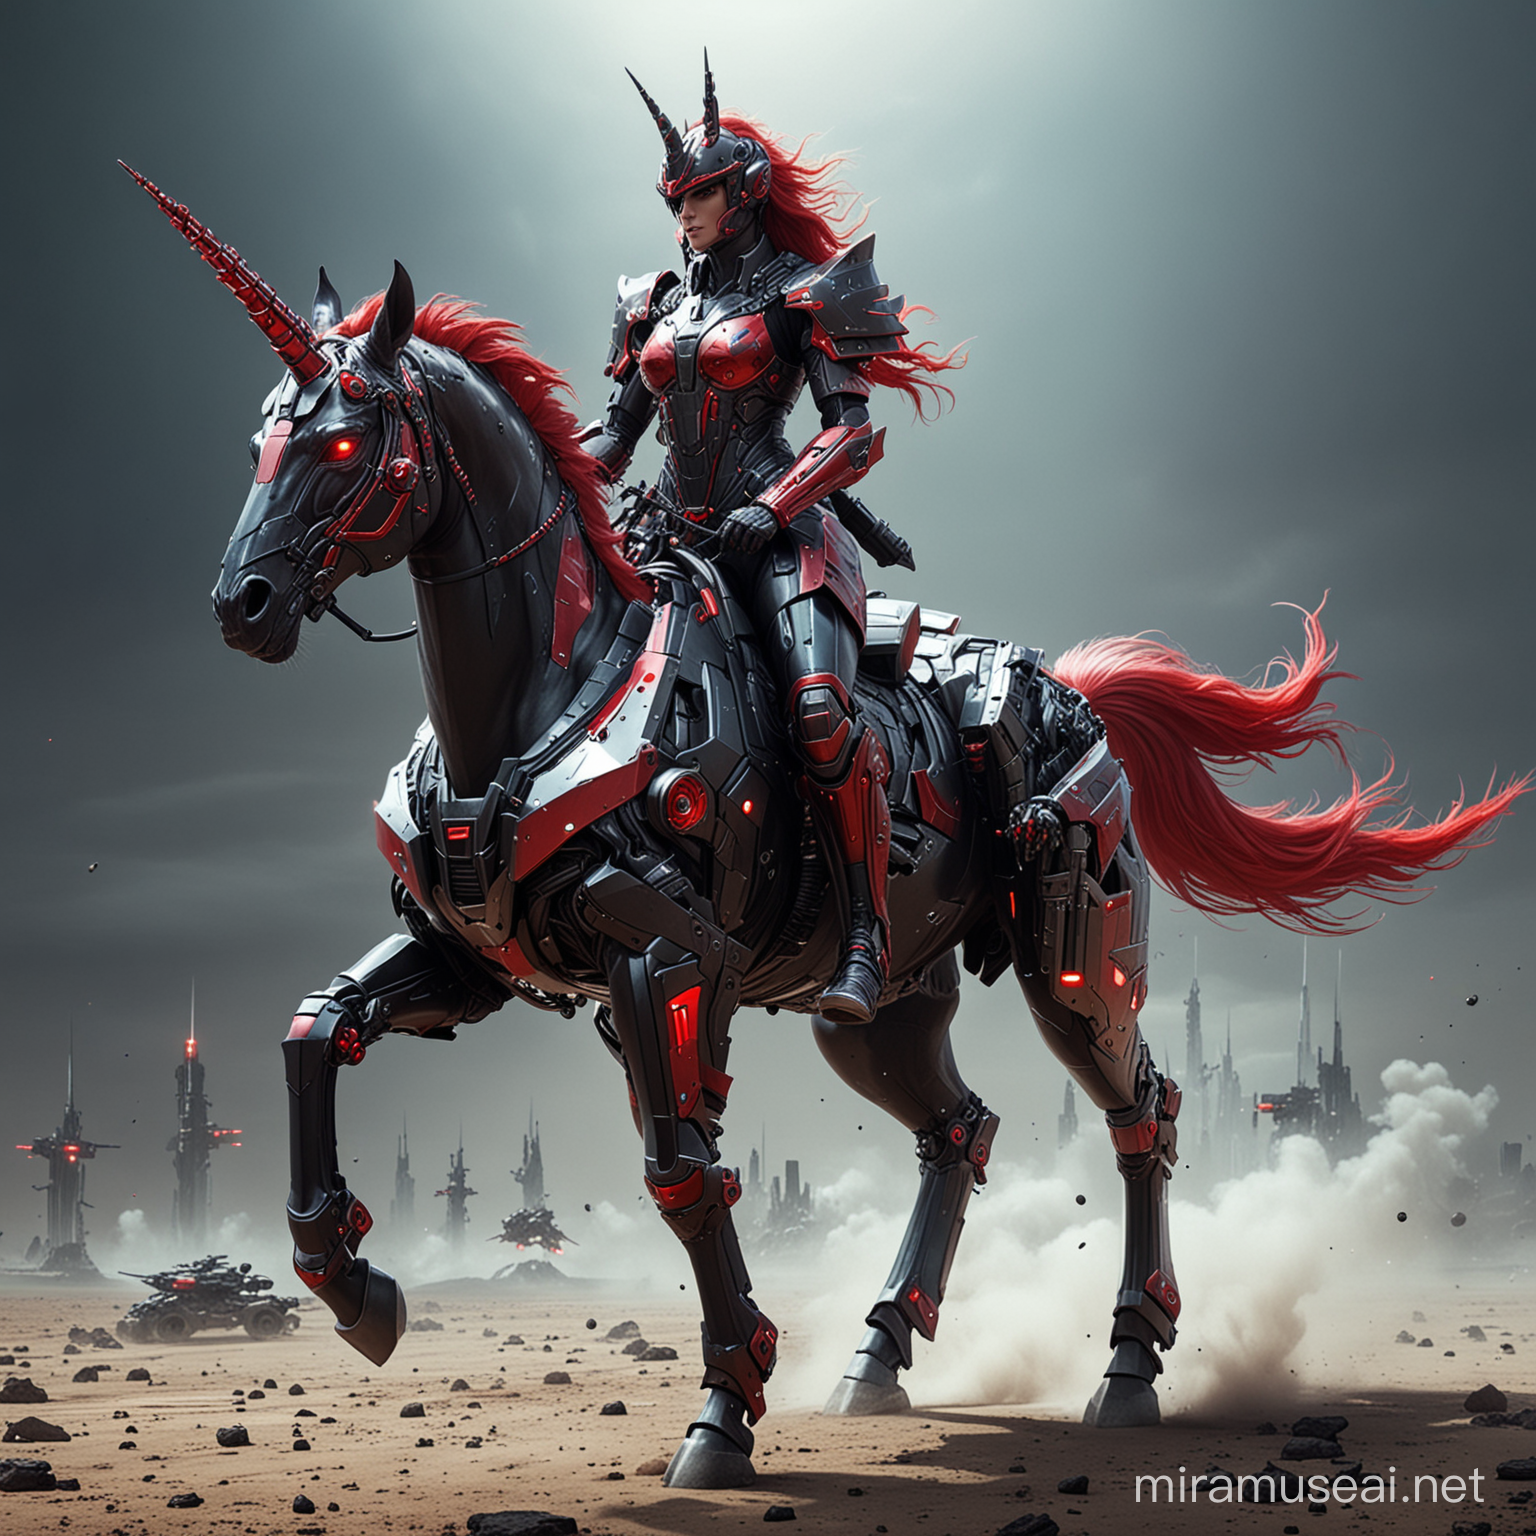 Futuristic Cyber Warrior Riding Red and Black Armored Unicorn Across Open Plains